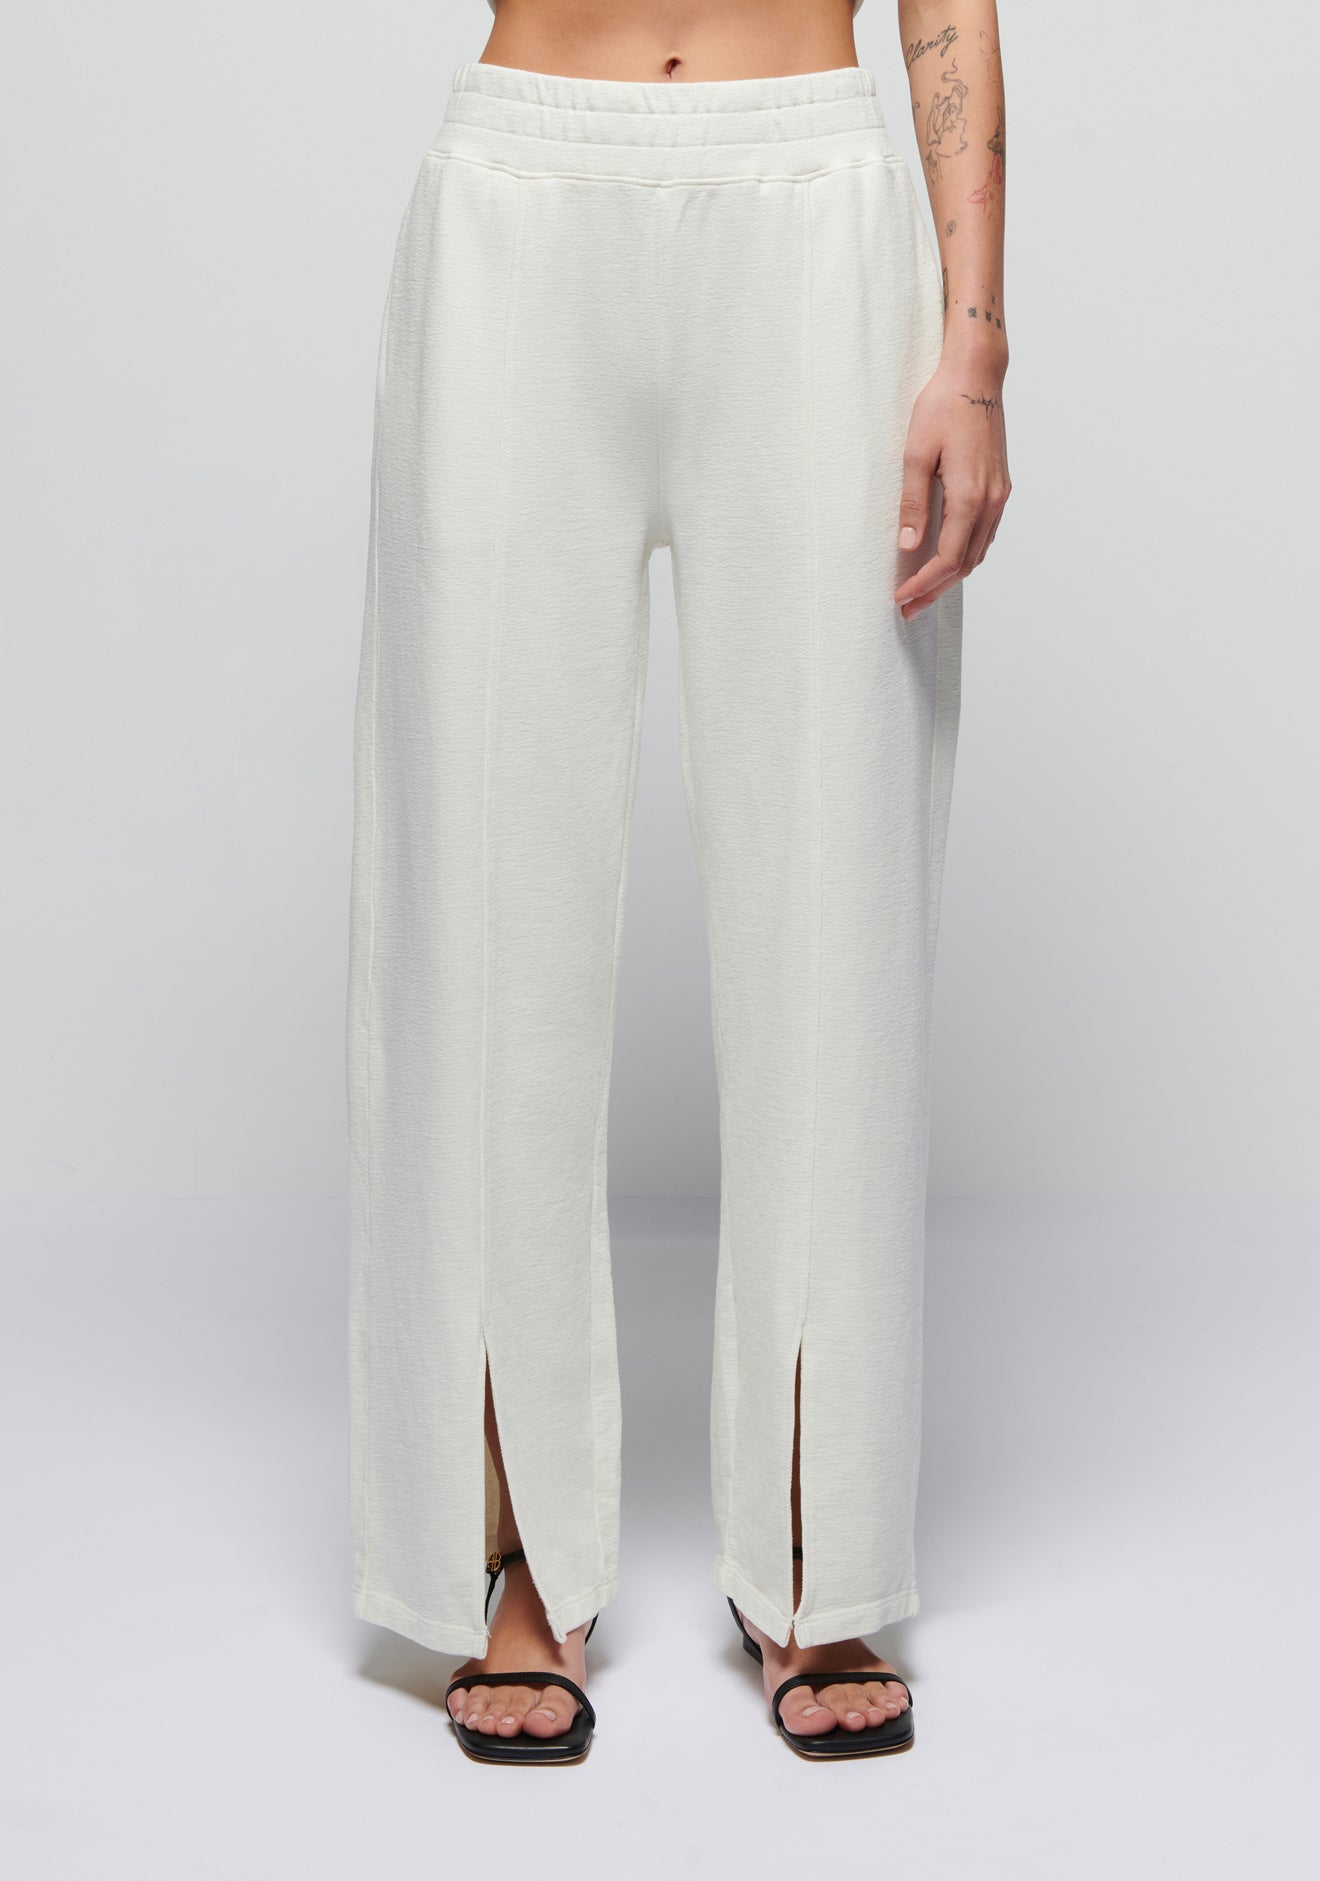 Lincoln Knit Pant